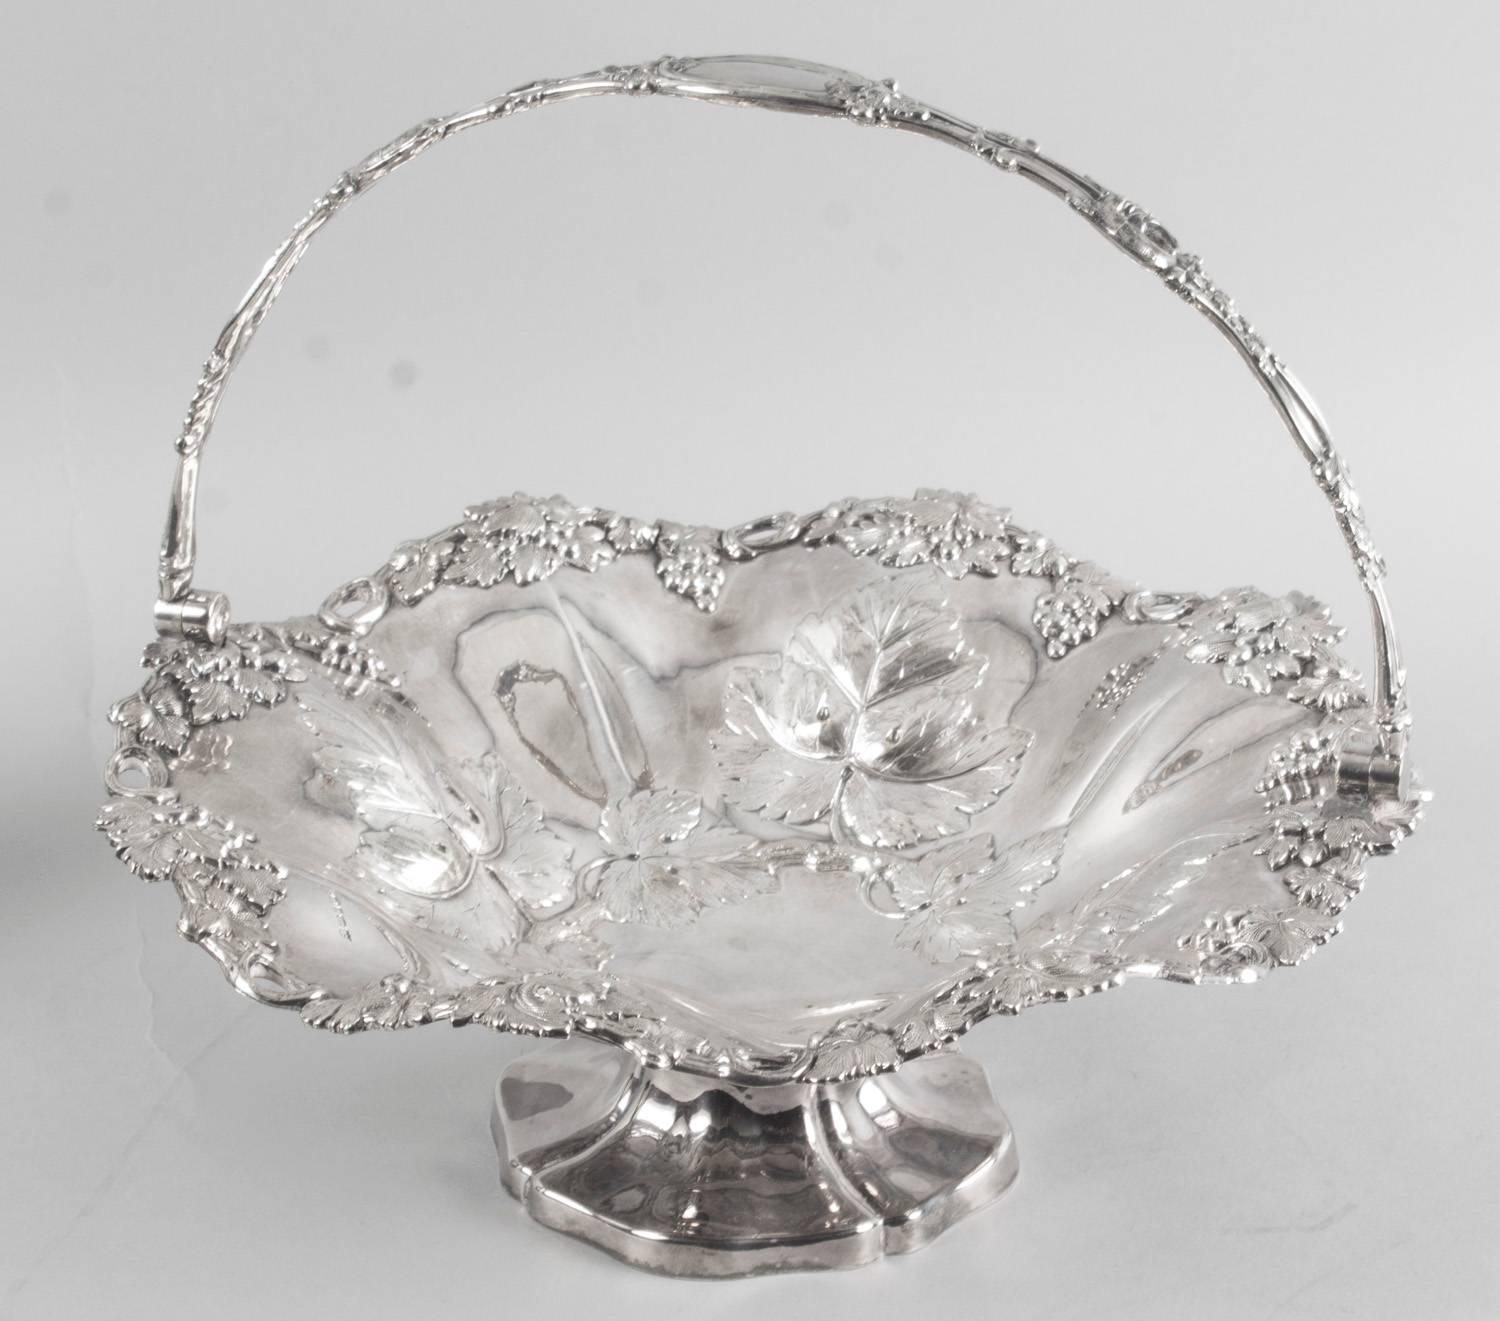 This is a stunning antique English Victorian silver plated fruit or bread basket with fabulous embossed and engraved decoration, circa 1860 in date.

It has beautifully decorated with vines and grapes and bears the makers mark of the London